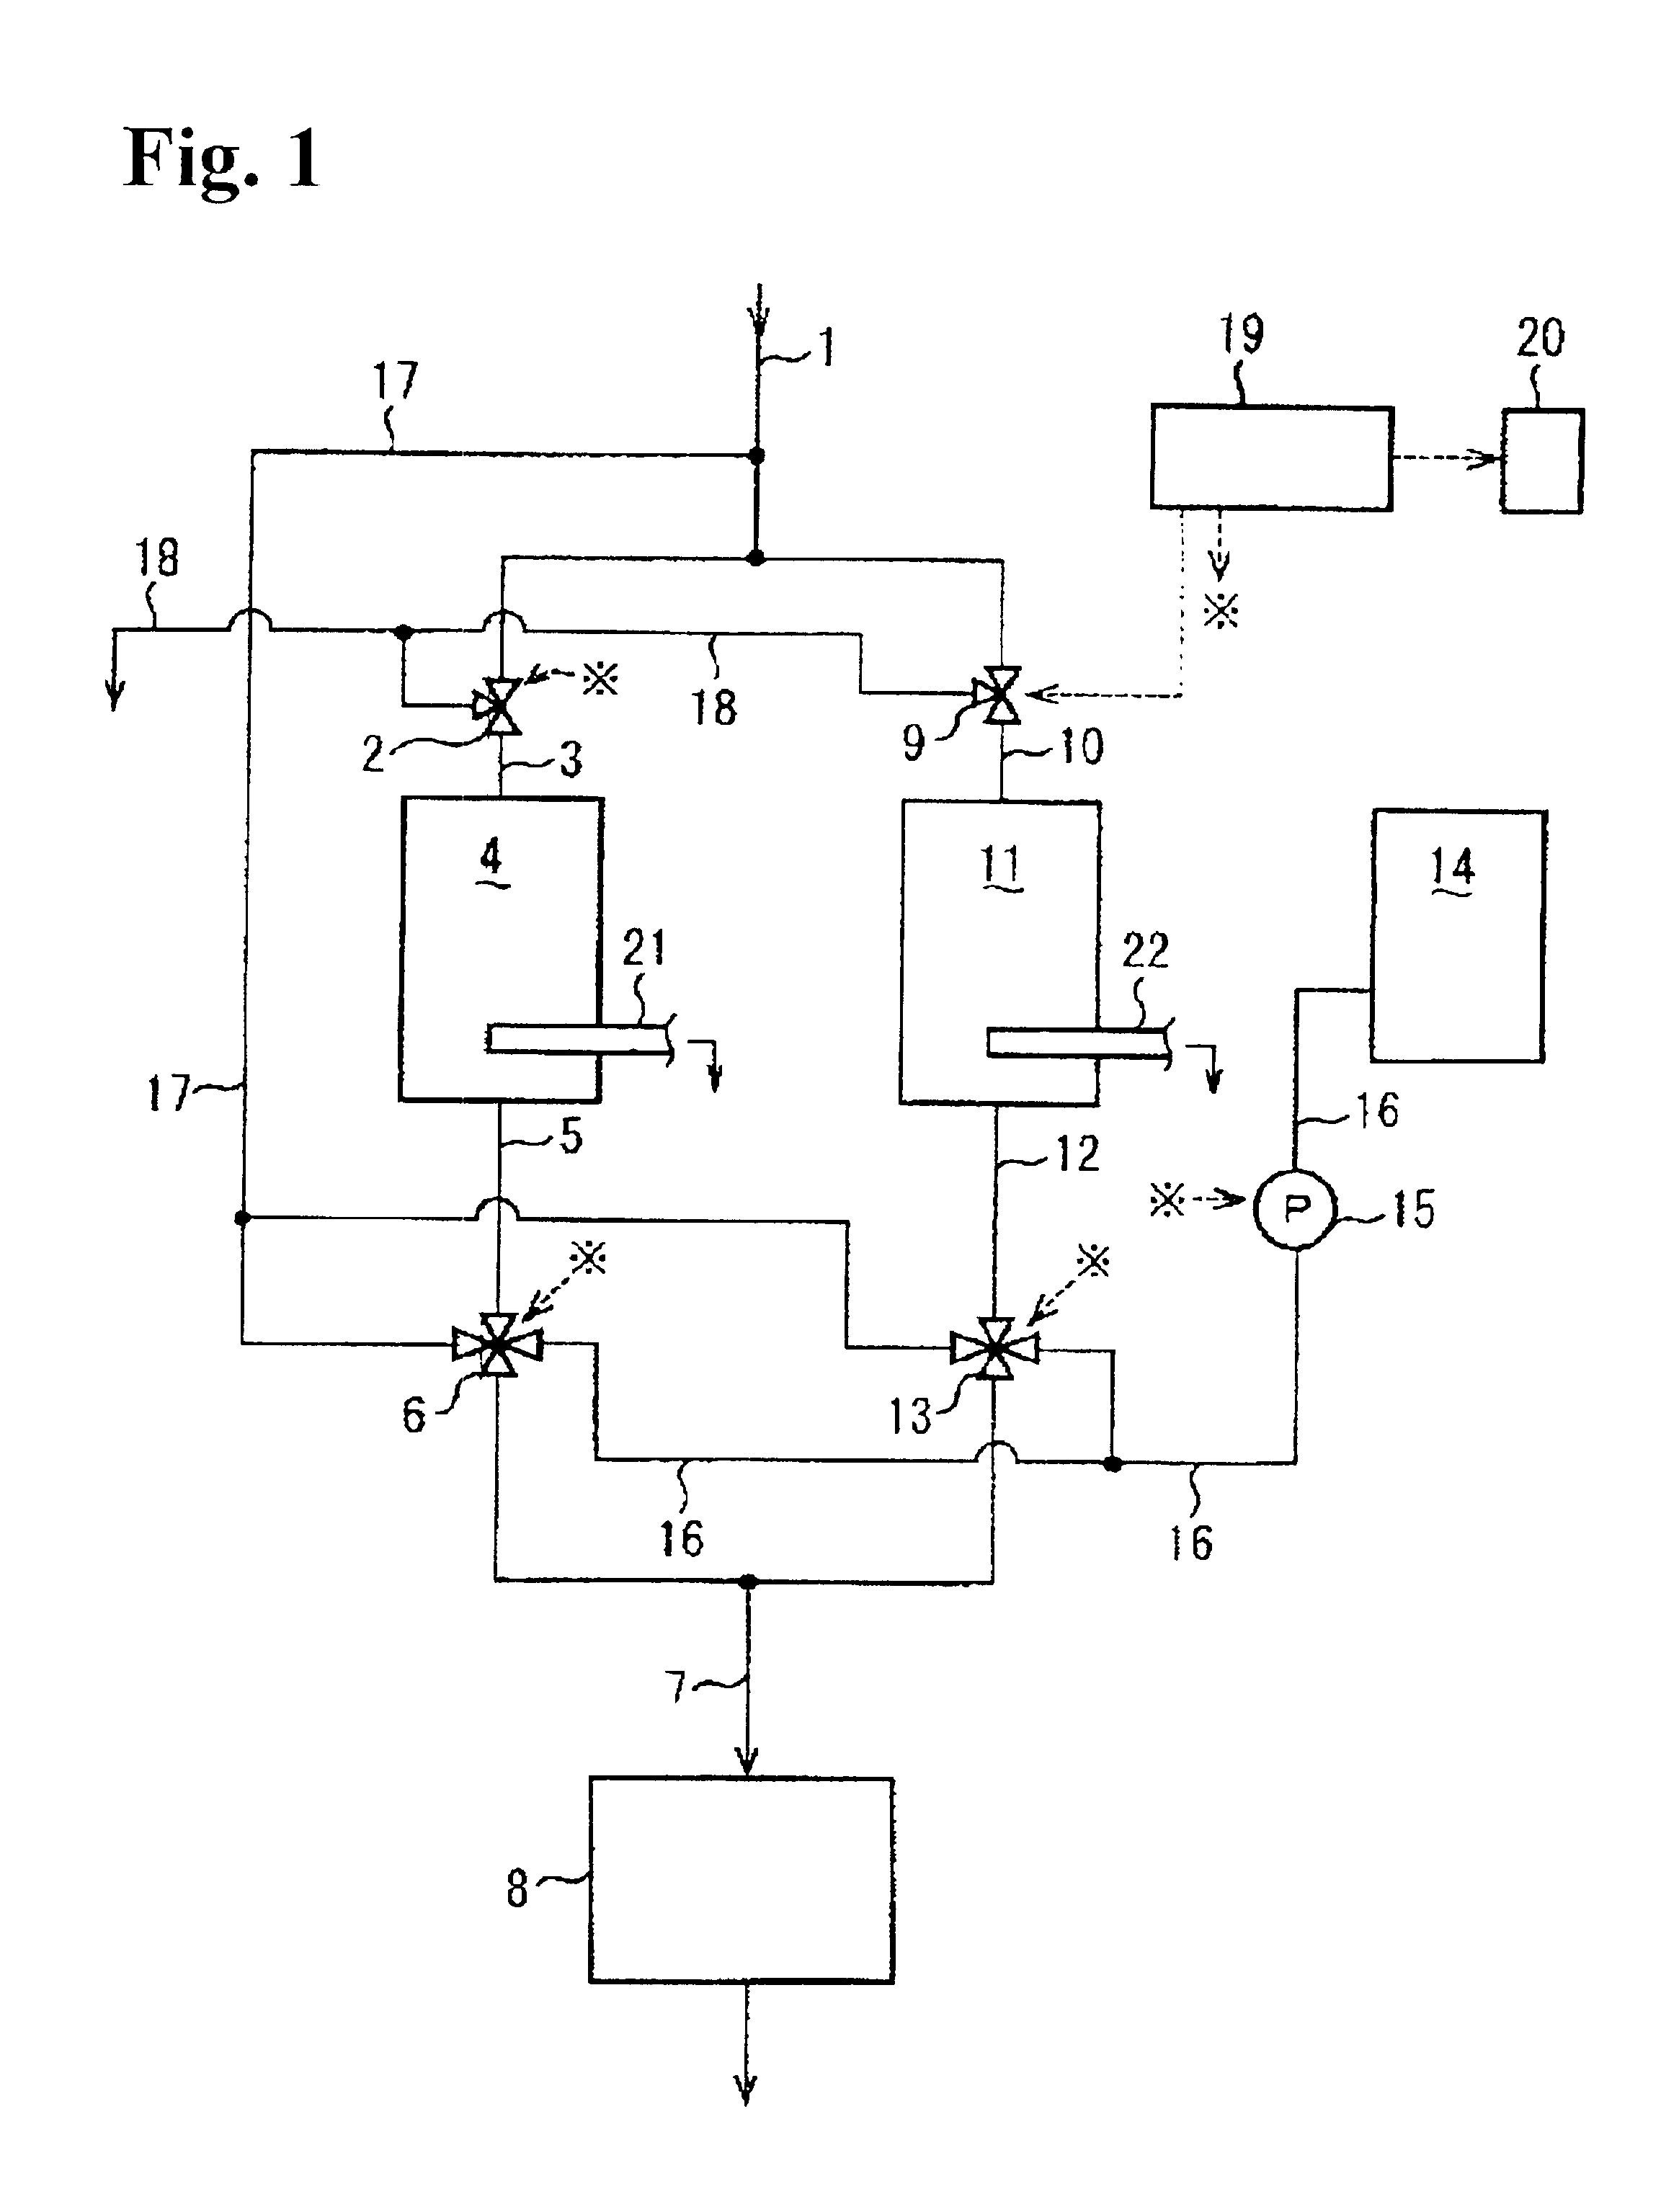 Water softening device